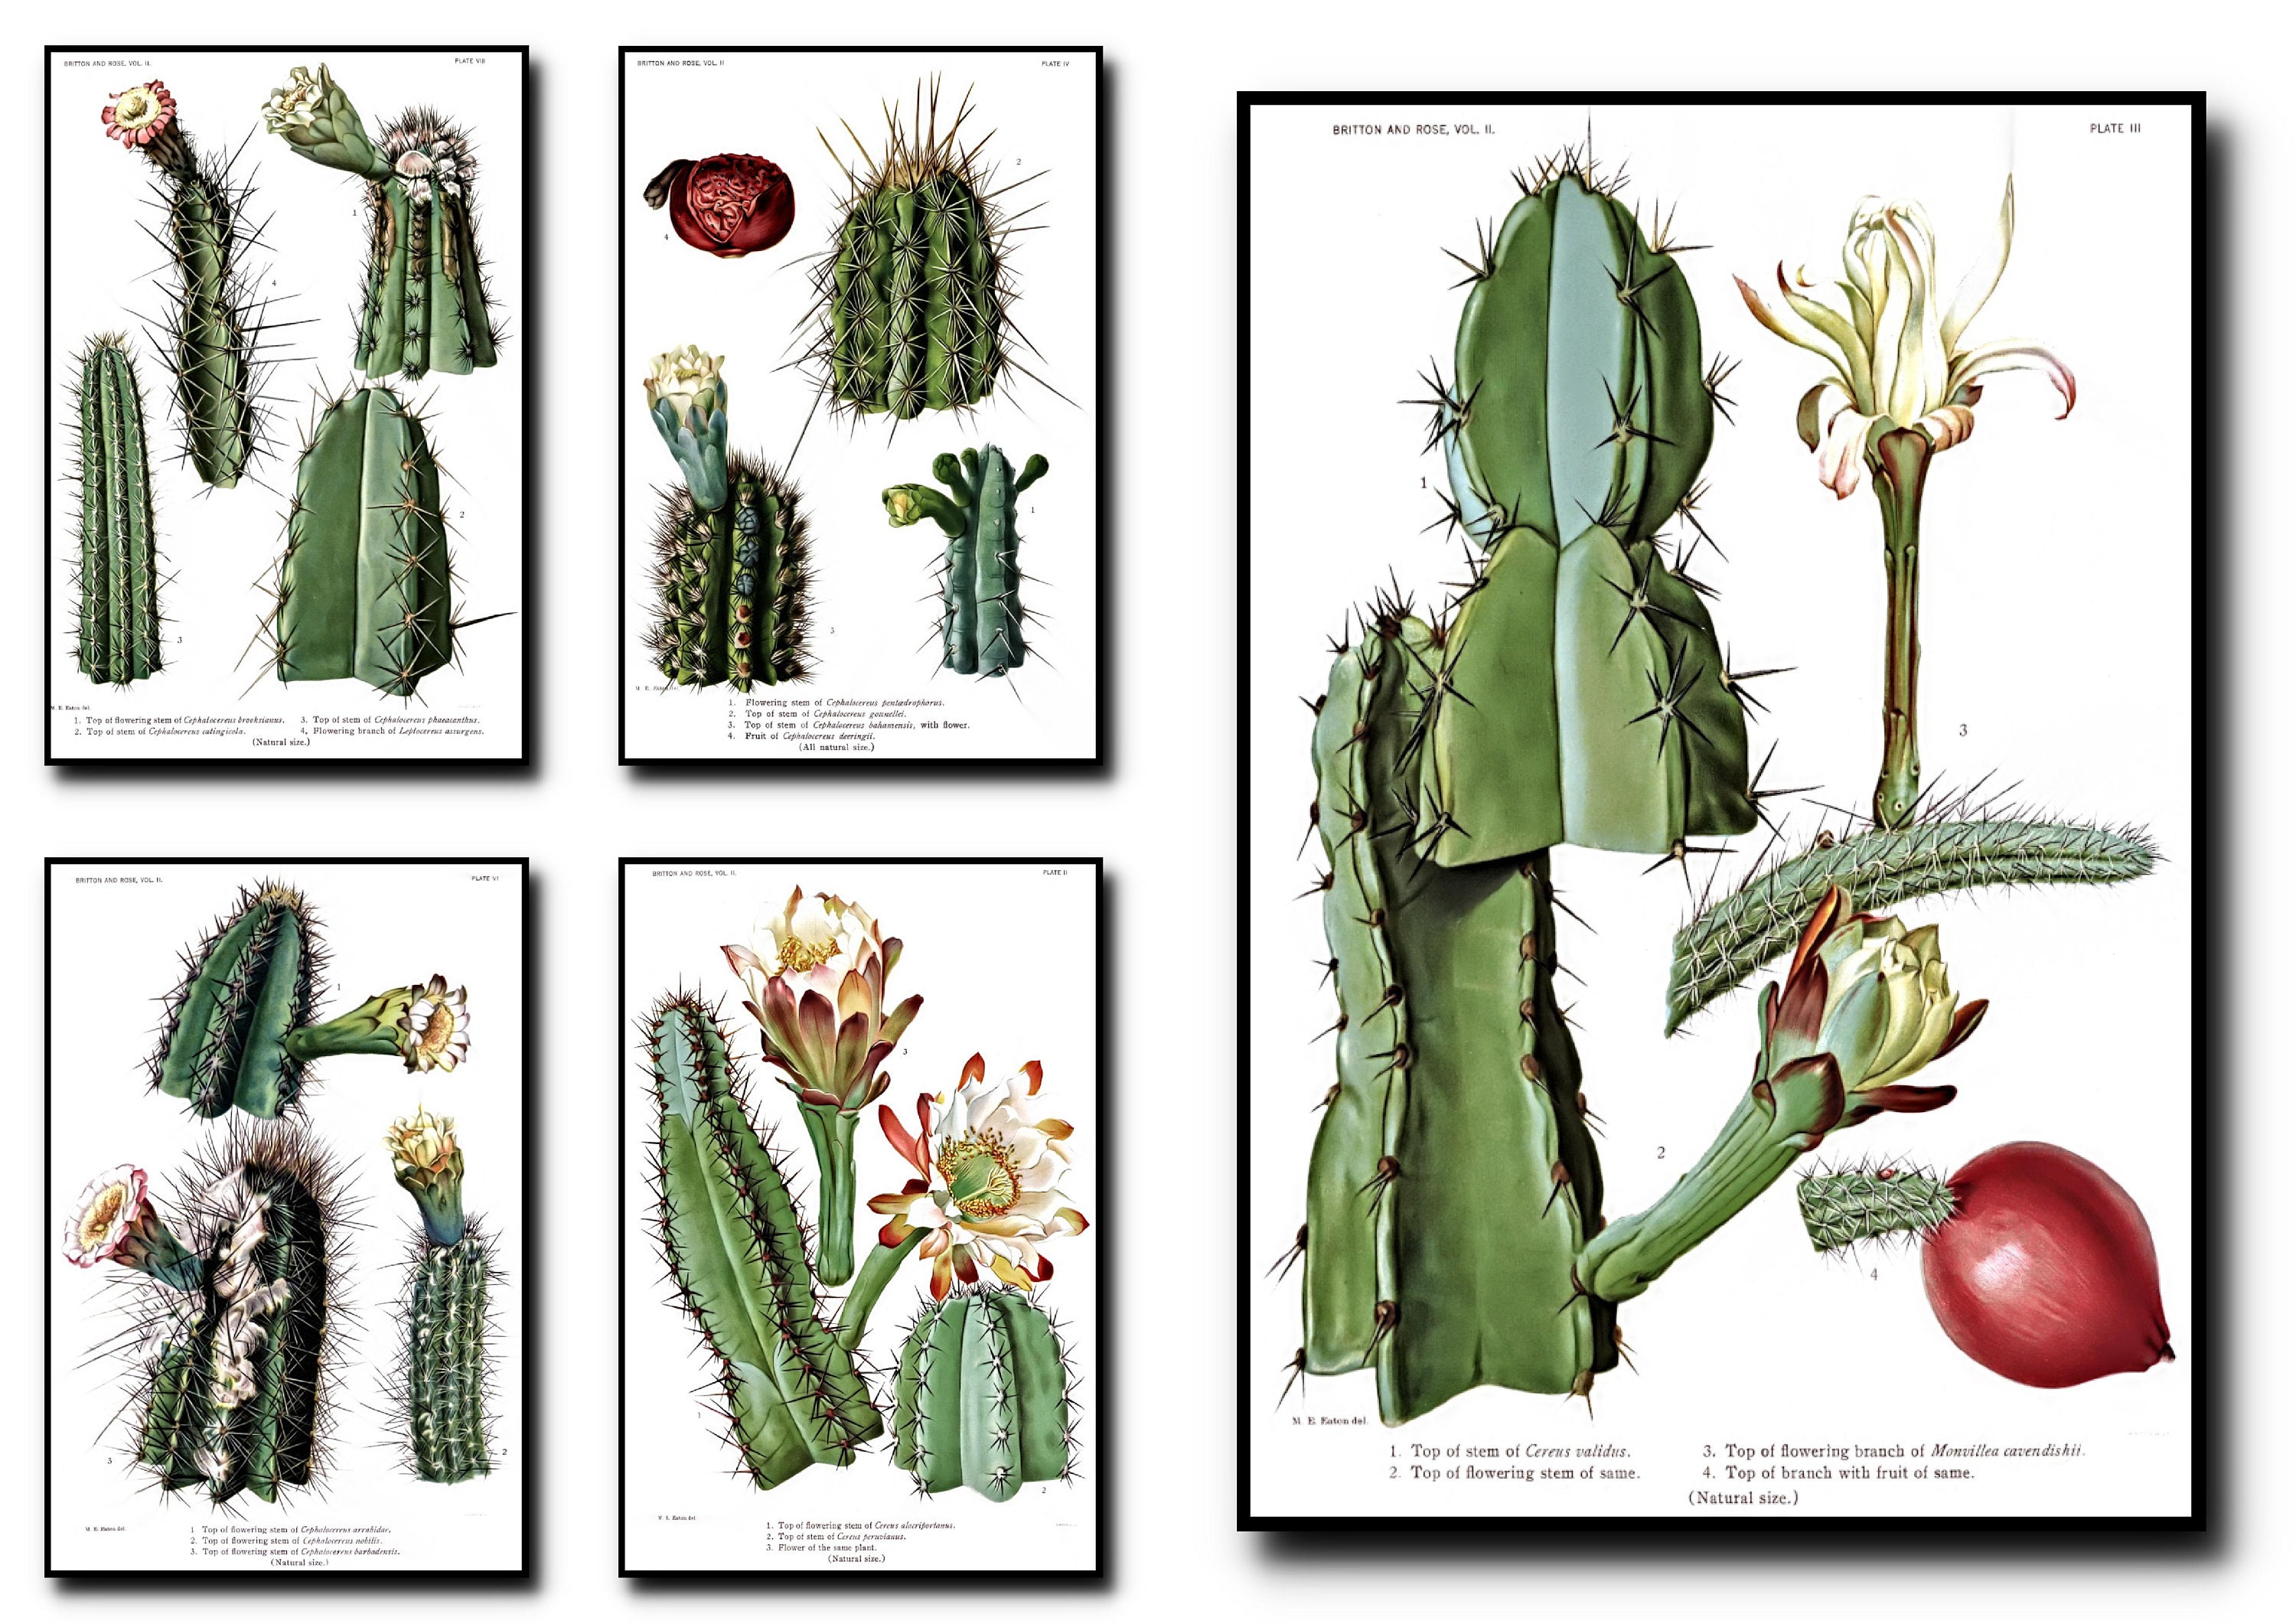 5. Cactus Flower Nail Art Step by Step - wide 2